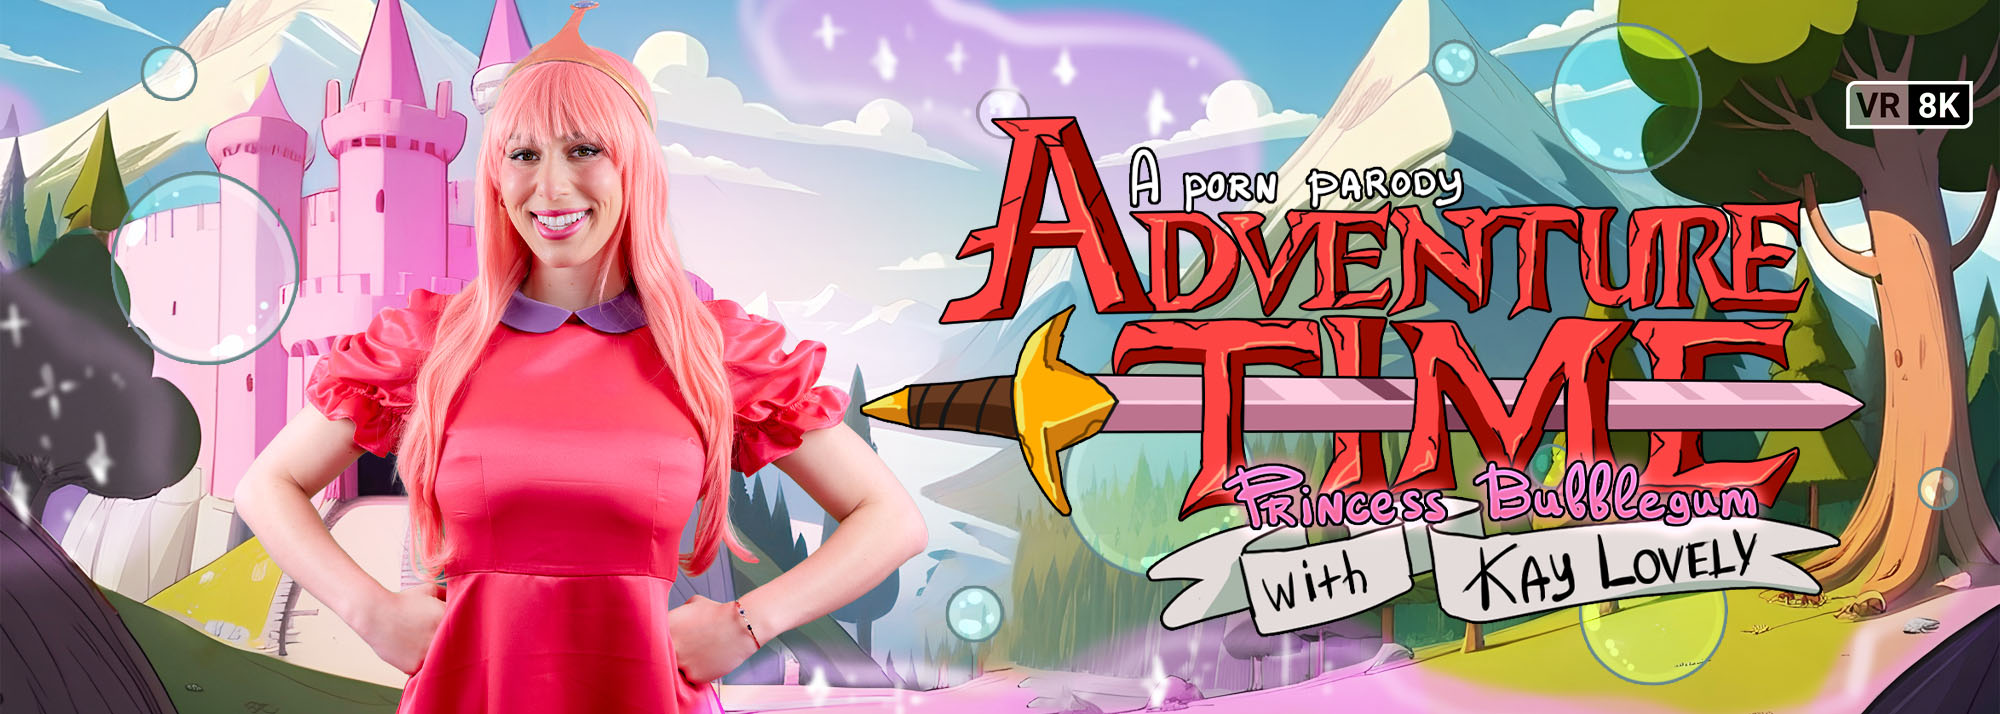 Adventure Time Princess Bubblegum And Flame Princess Porn - Adventure Time: Princess Bubblegum (A Porn Parody) - Cosplay VR Porn Video  | VR Conk